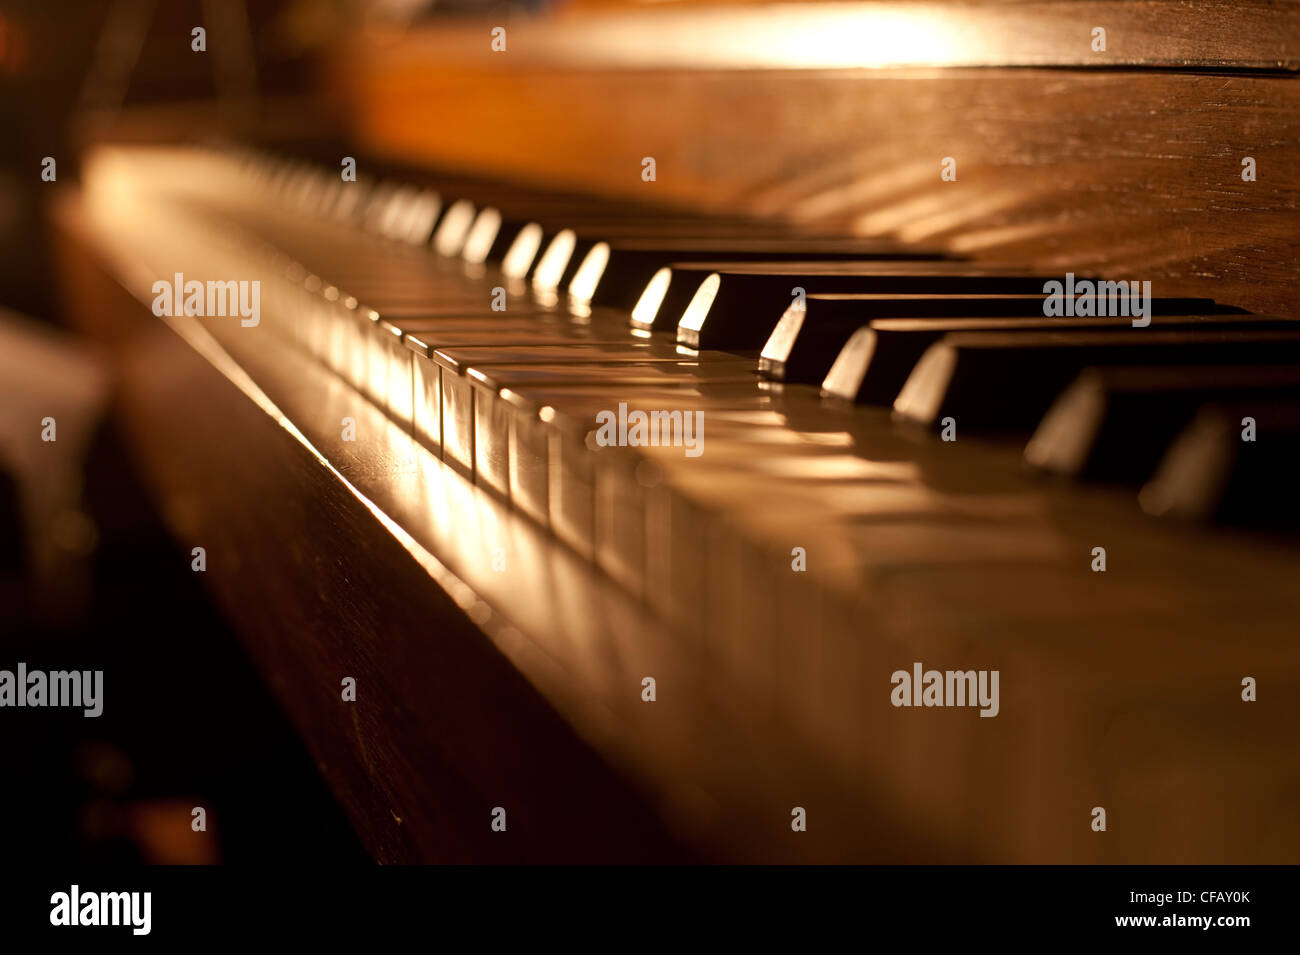 Closeup of antique piano keys and wood grain with sepia tone Stock Photo